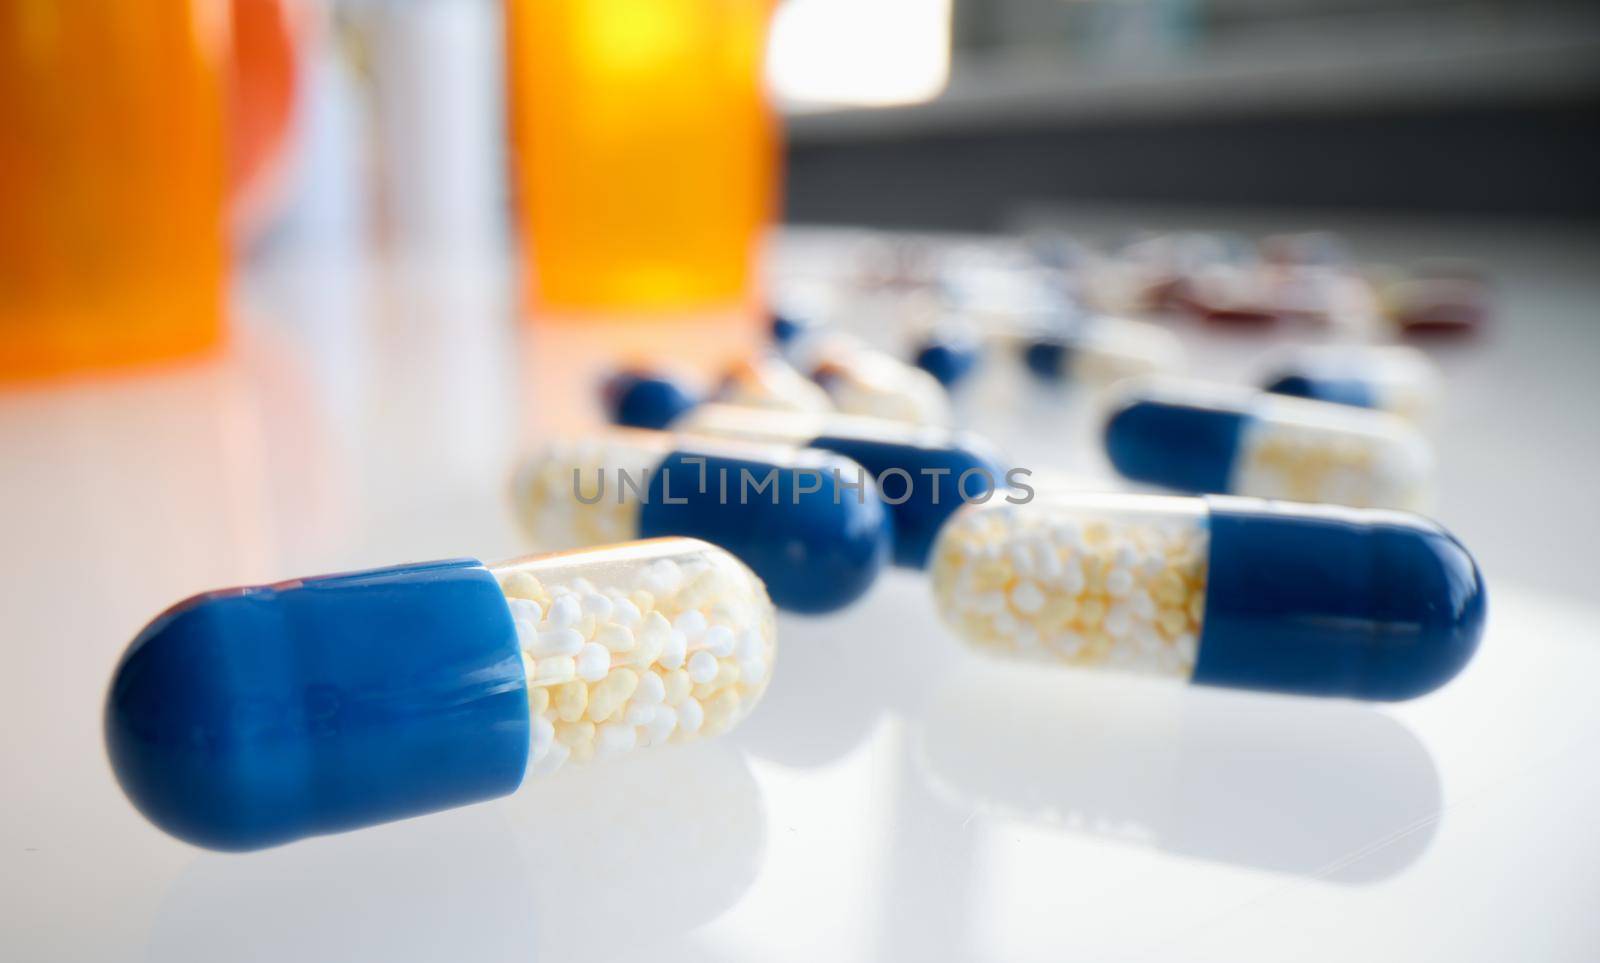 Medicine capsules and bottles of treat on white background closeup. Treatment with dietary supplements concept